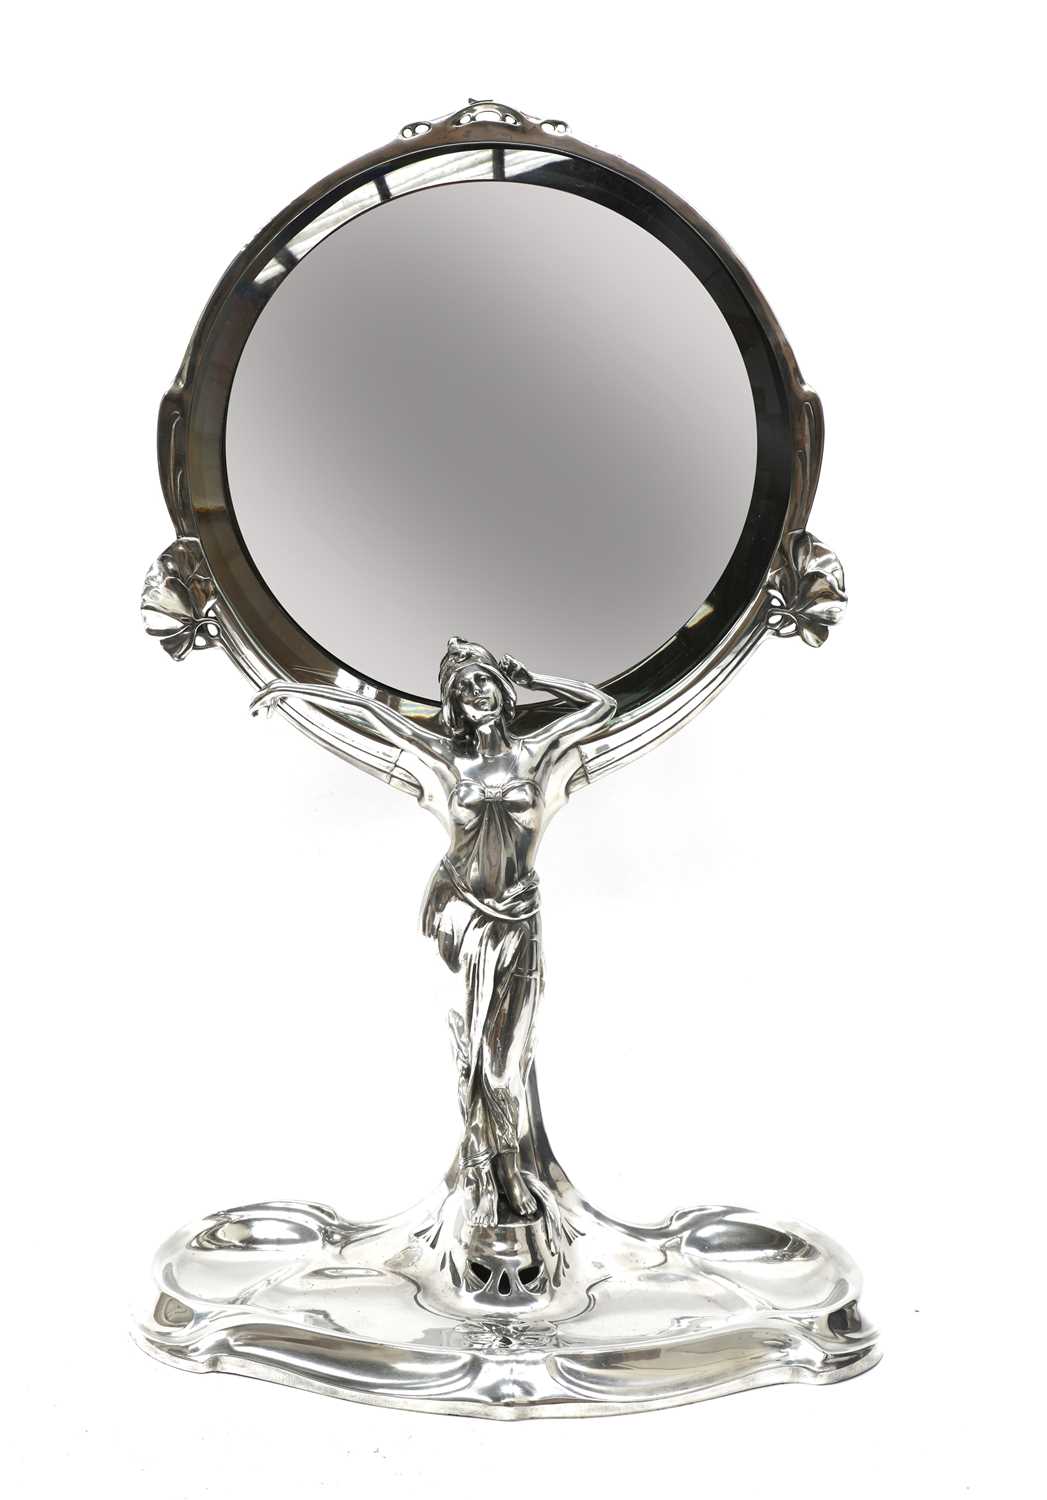 Lot 81 - A large B&G Imperial Zinn silver-plated mirror